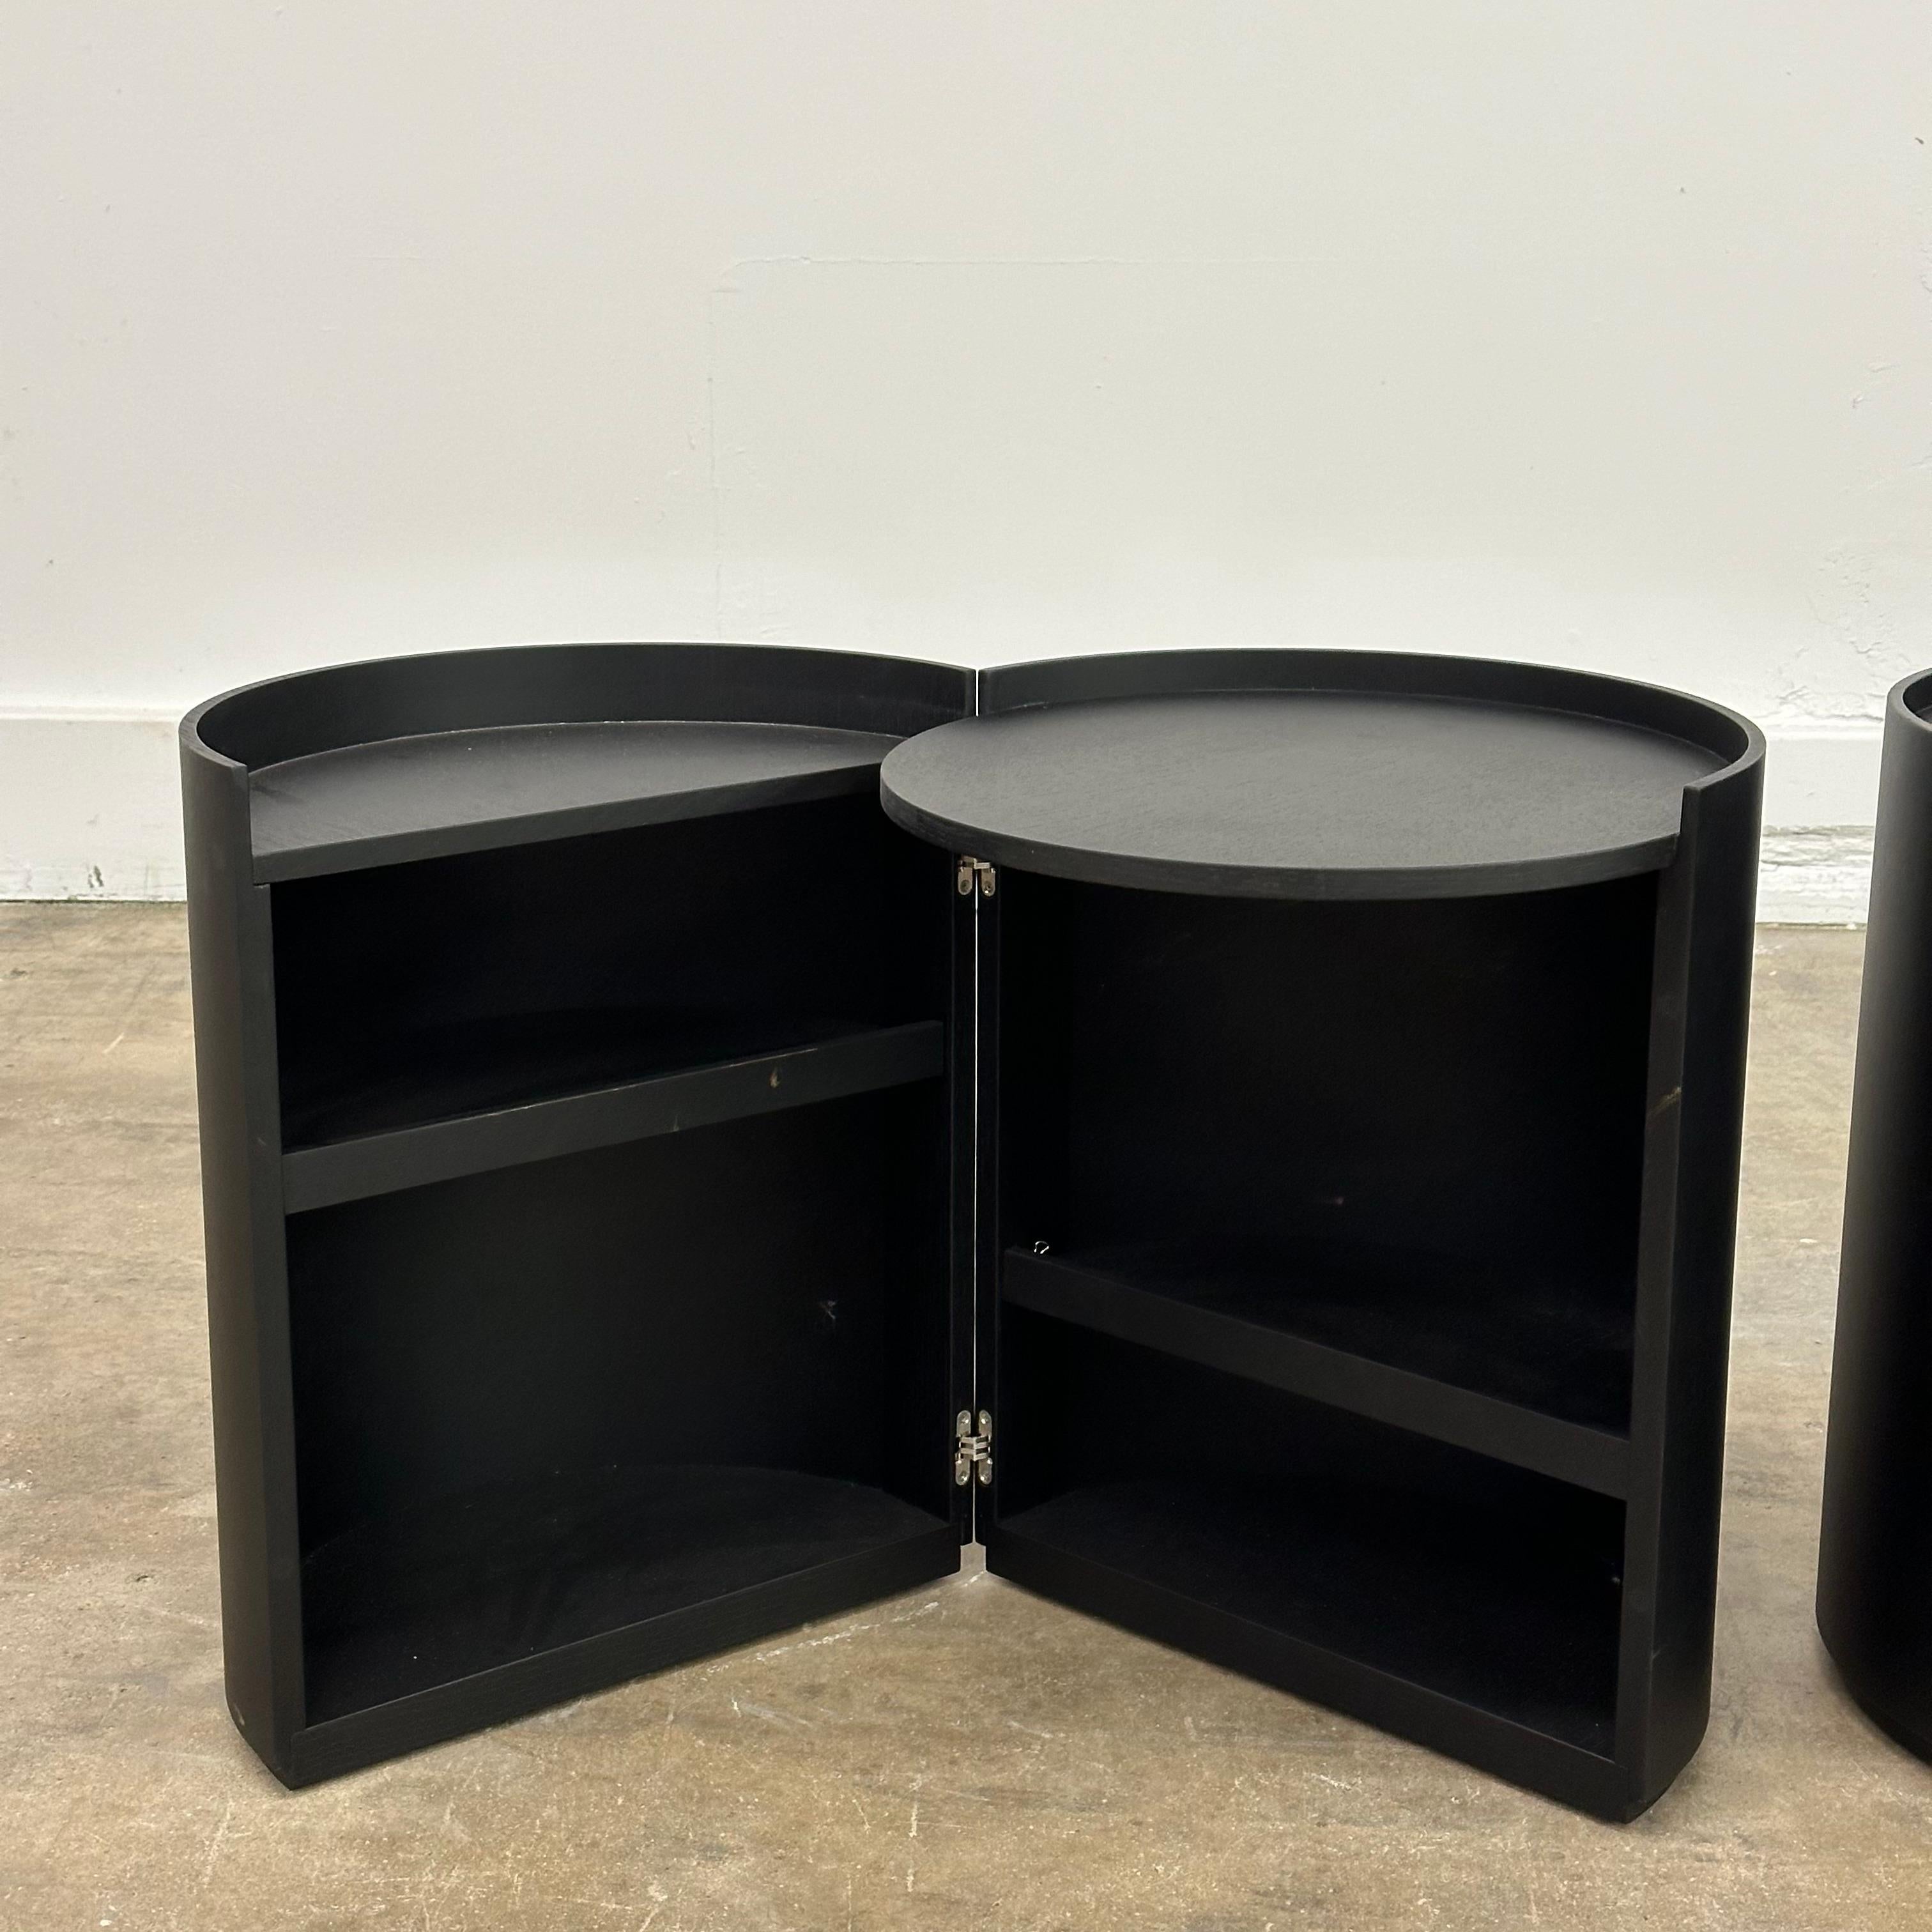 Pair of Moon Bedside Tables by Mist-O for Living Divani, Italy, 2014 In Good Condition For Sale In Skokie, IL